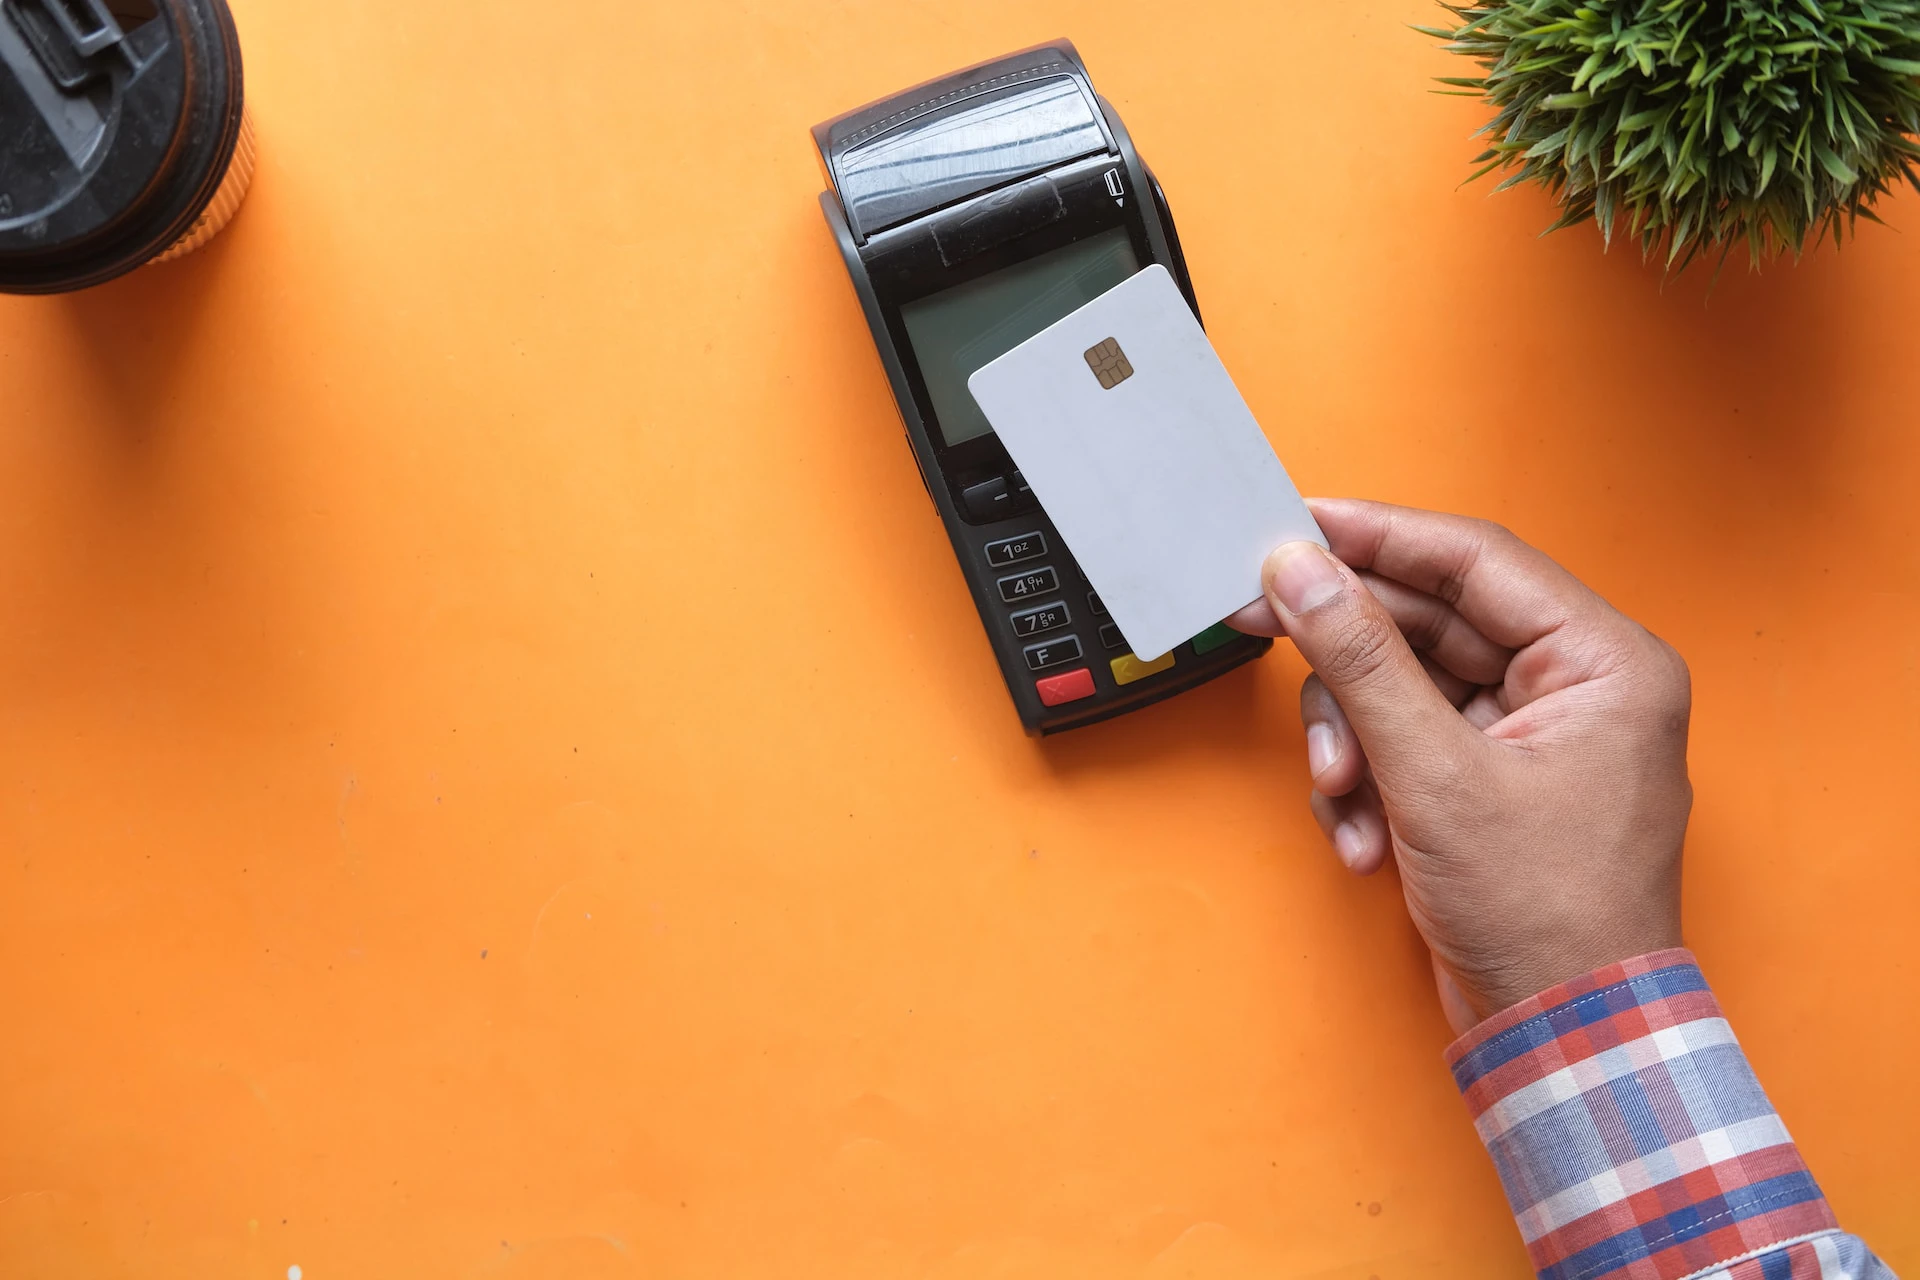 blank card with microchip tapping a card machine against an orange background